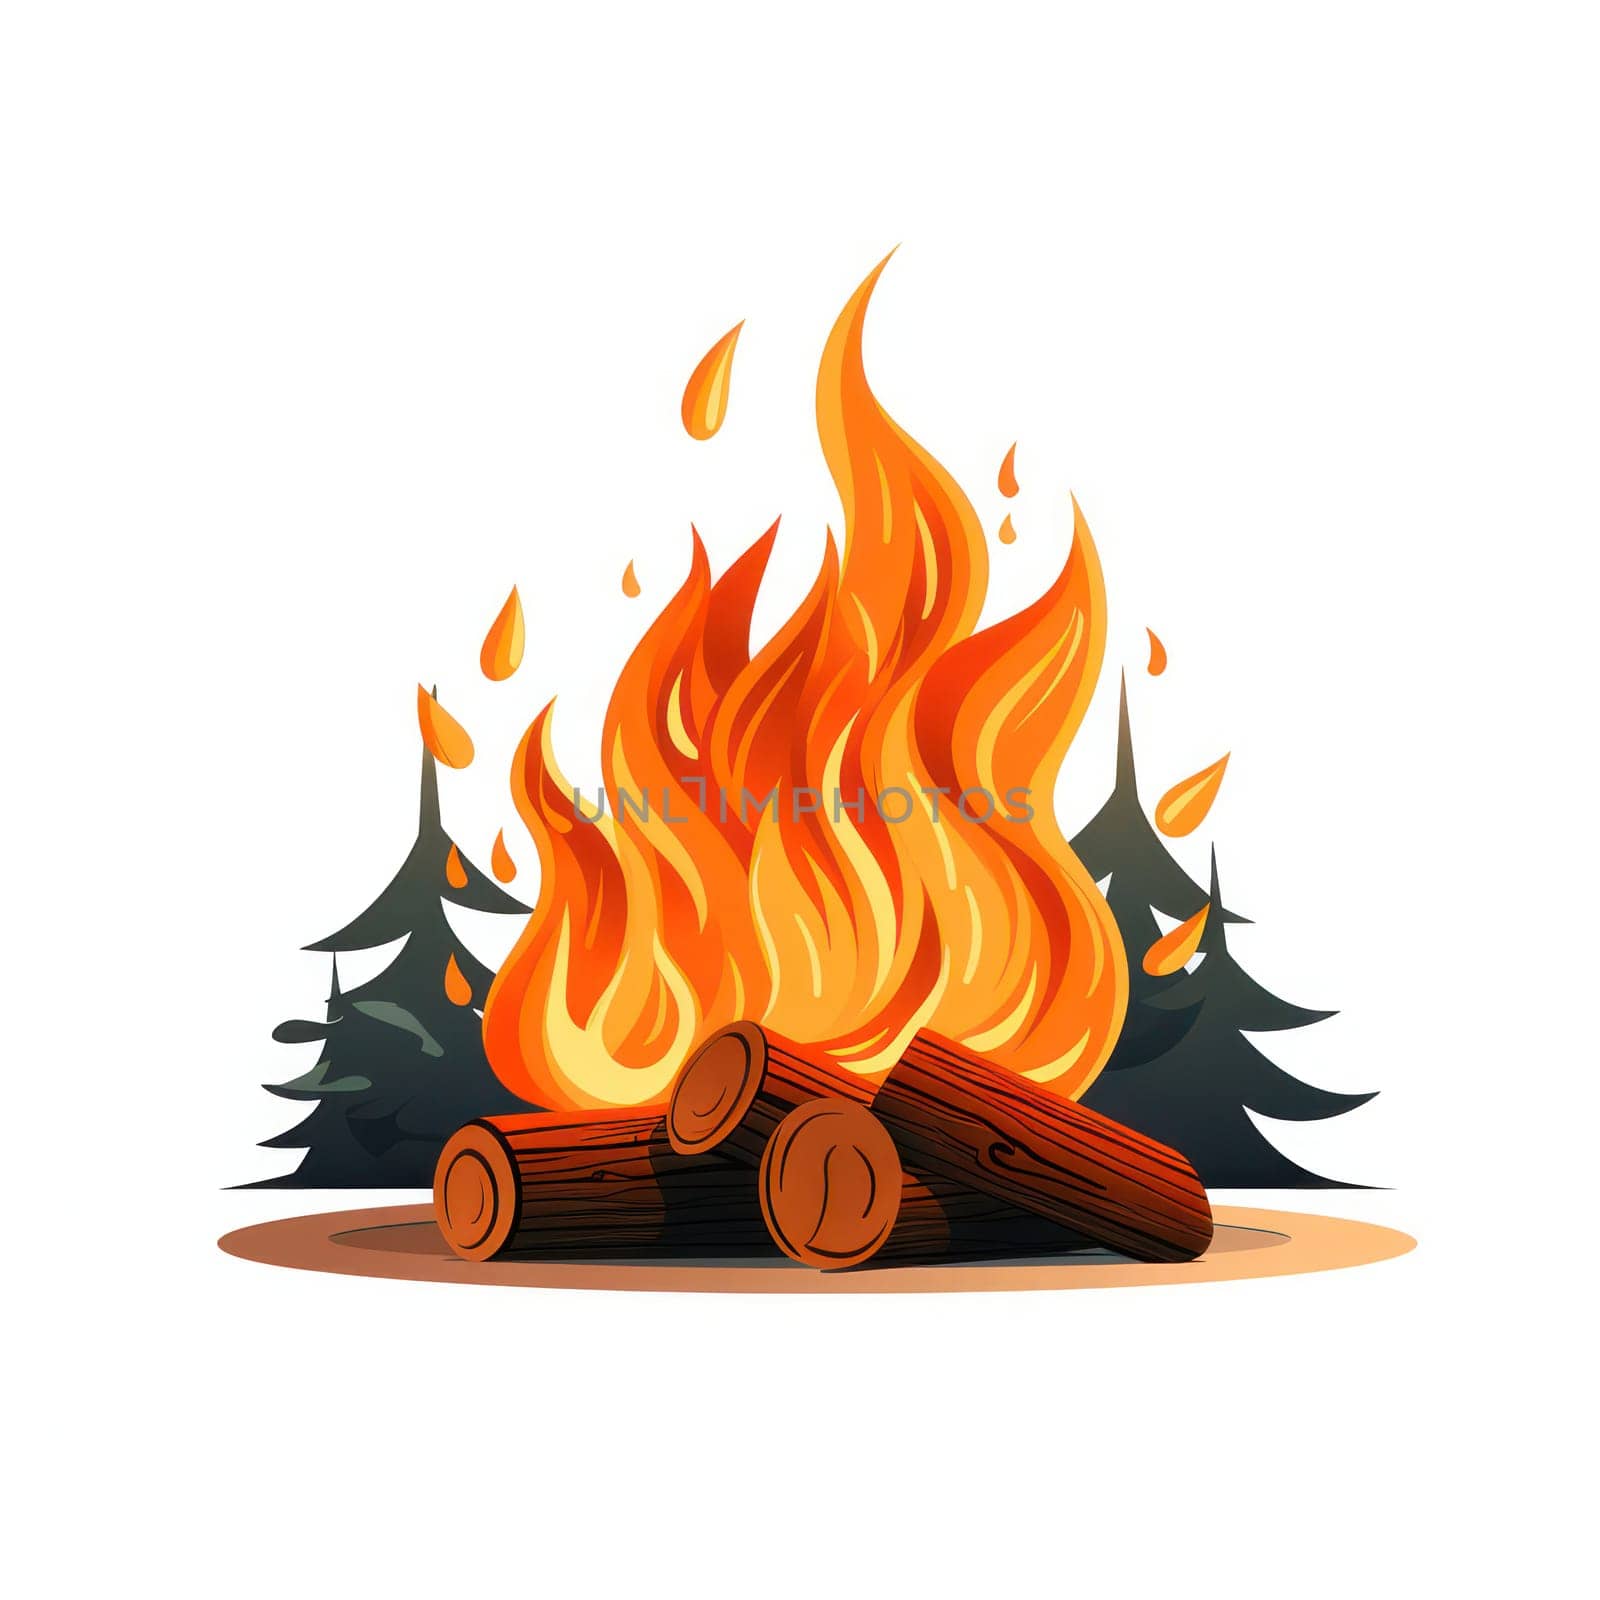 Burning Embers: A Vibrant Illustration of a Campfire in a Mystical Forest by Vichizh